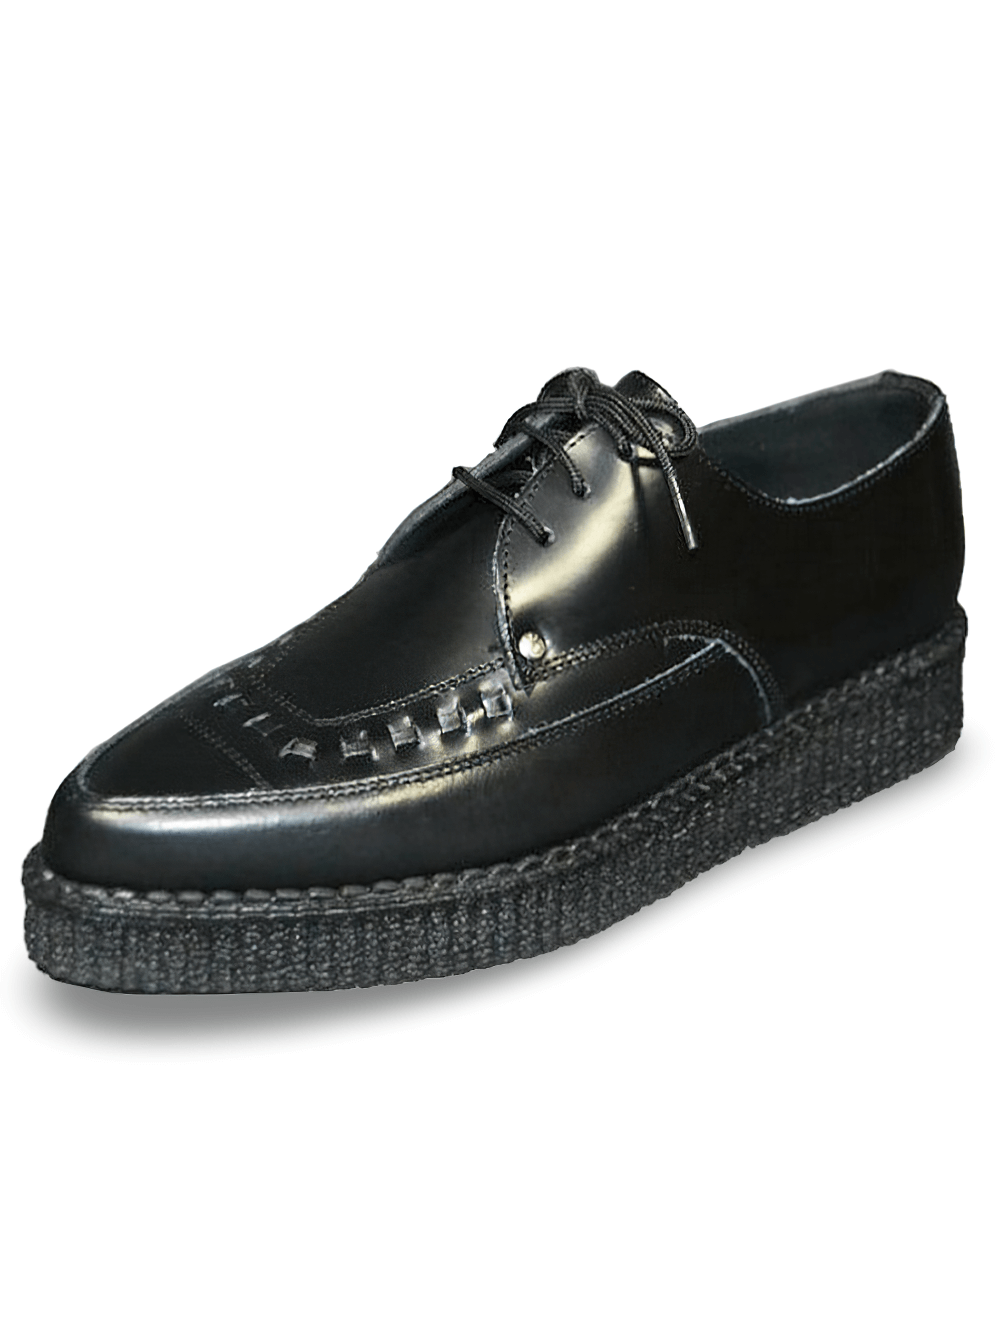 Sleek Black Leather Pointy Toe Creeper Lace-up Shoes